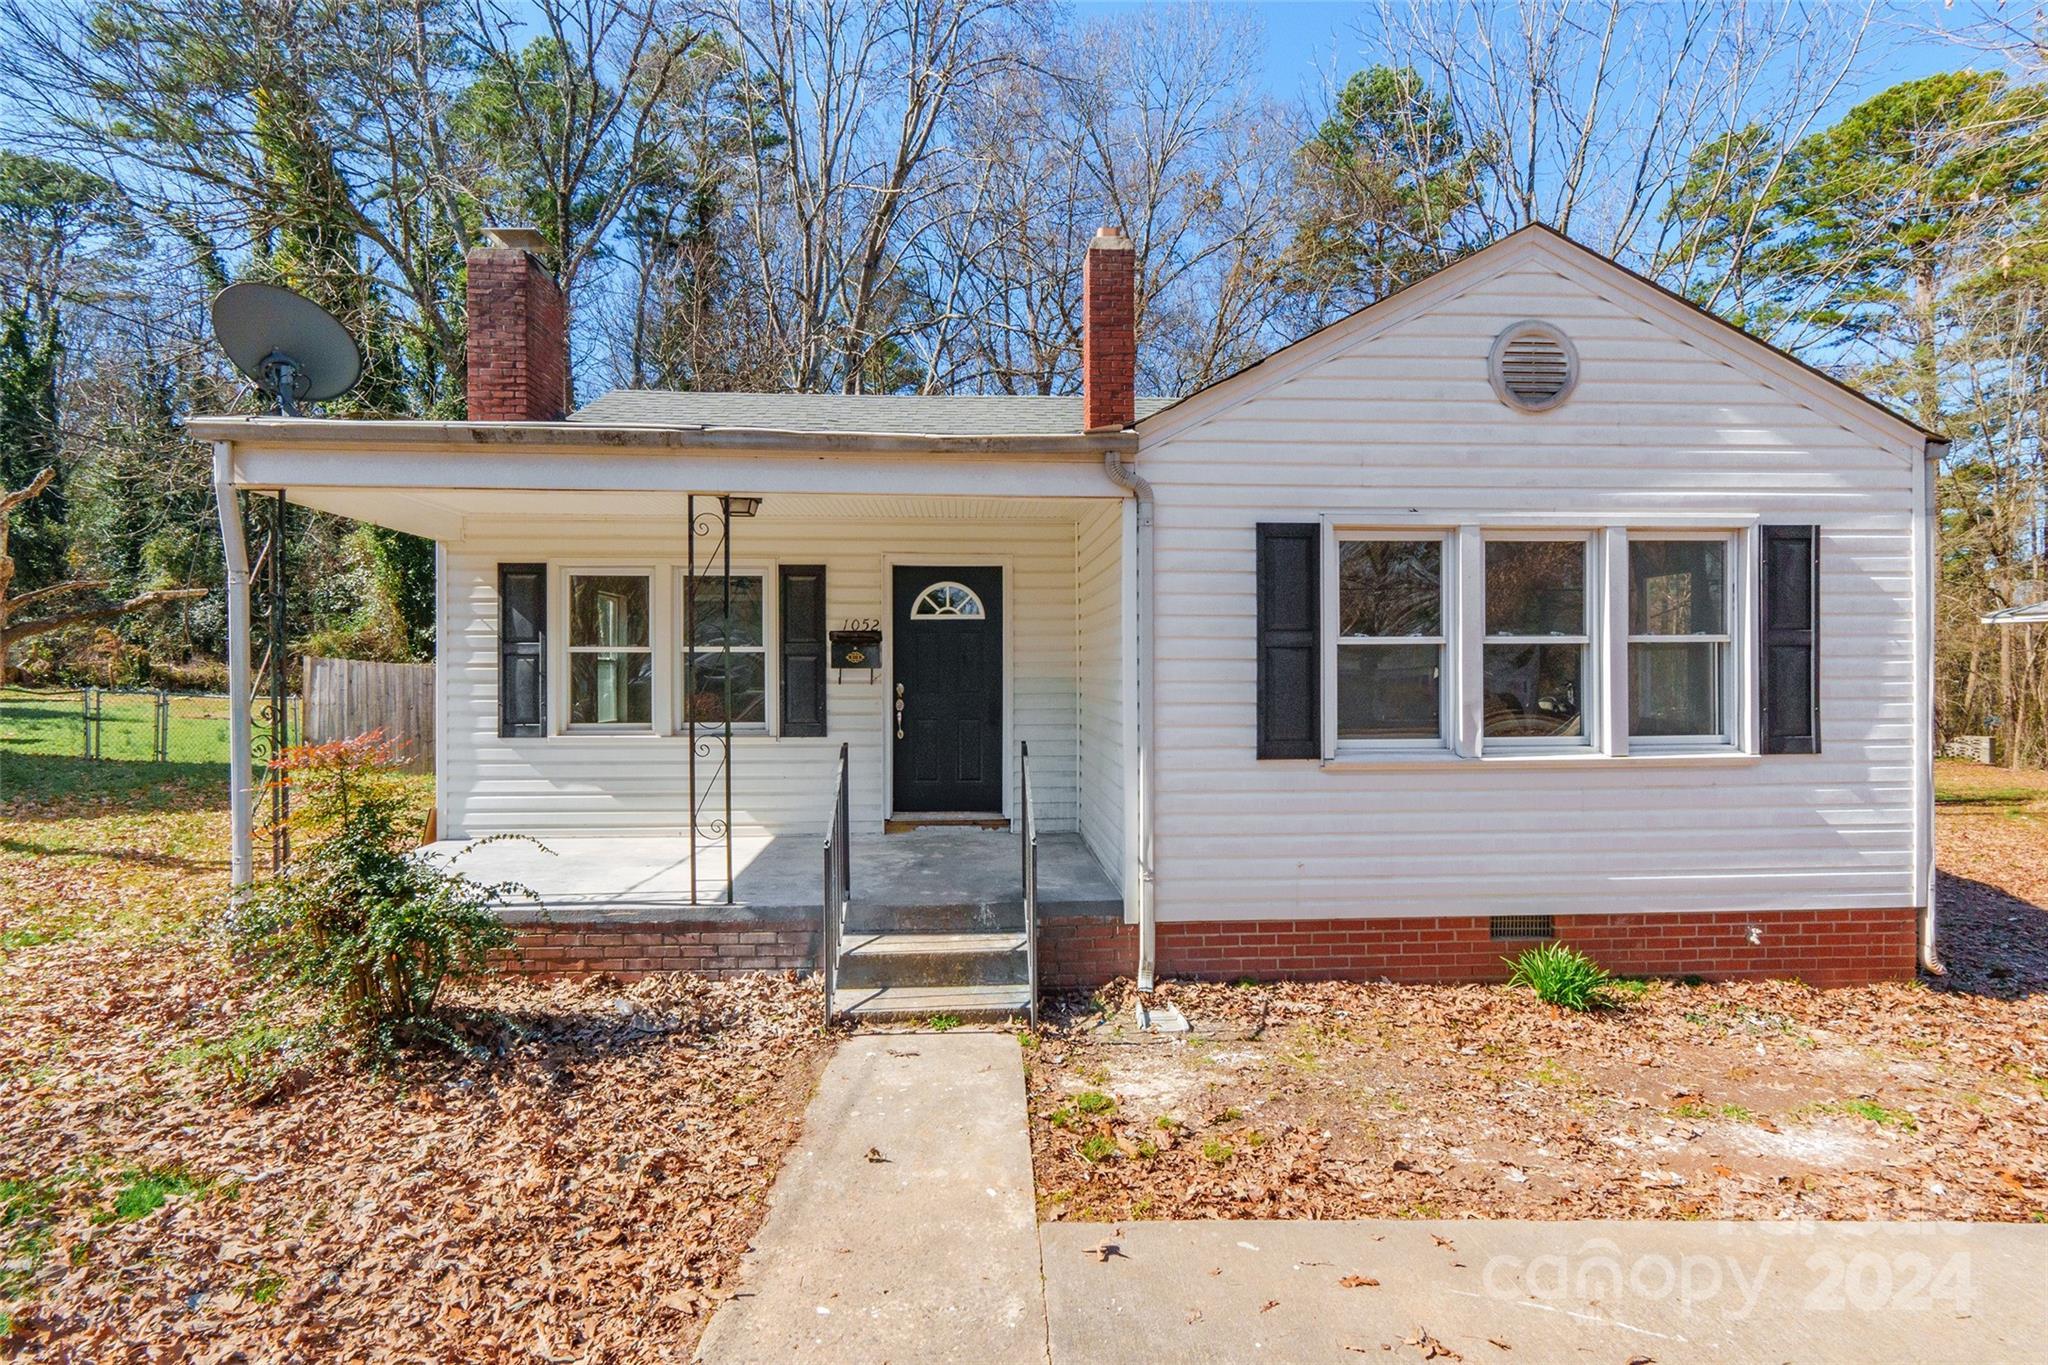 Photo one of 1052 Eastwood Dr Rock Hill SC 29730 | MLS 4110013